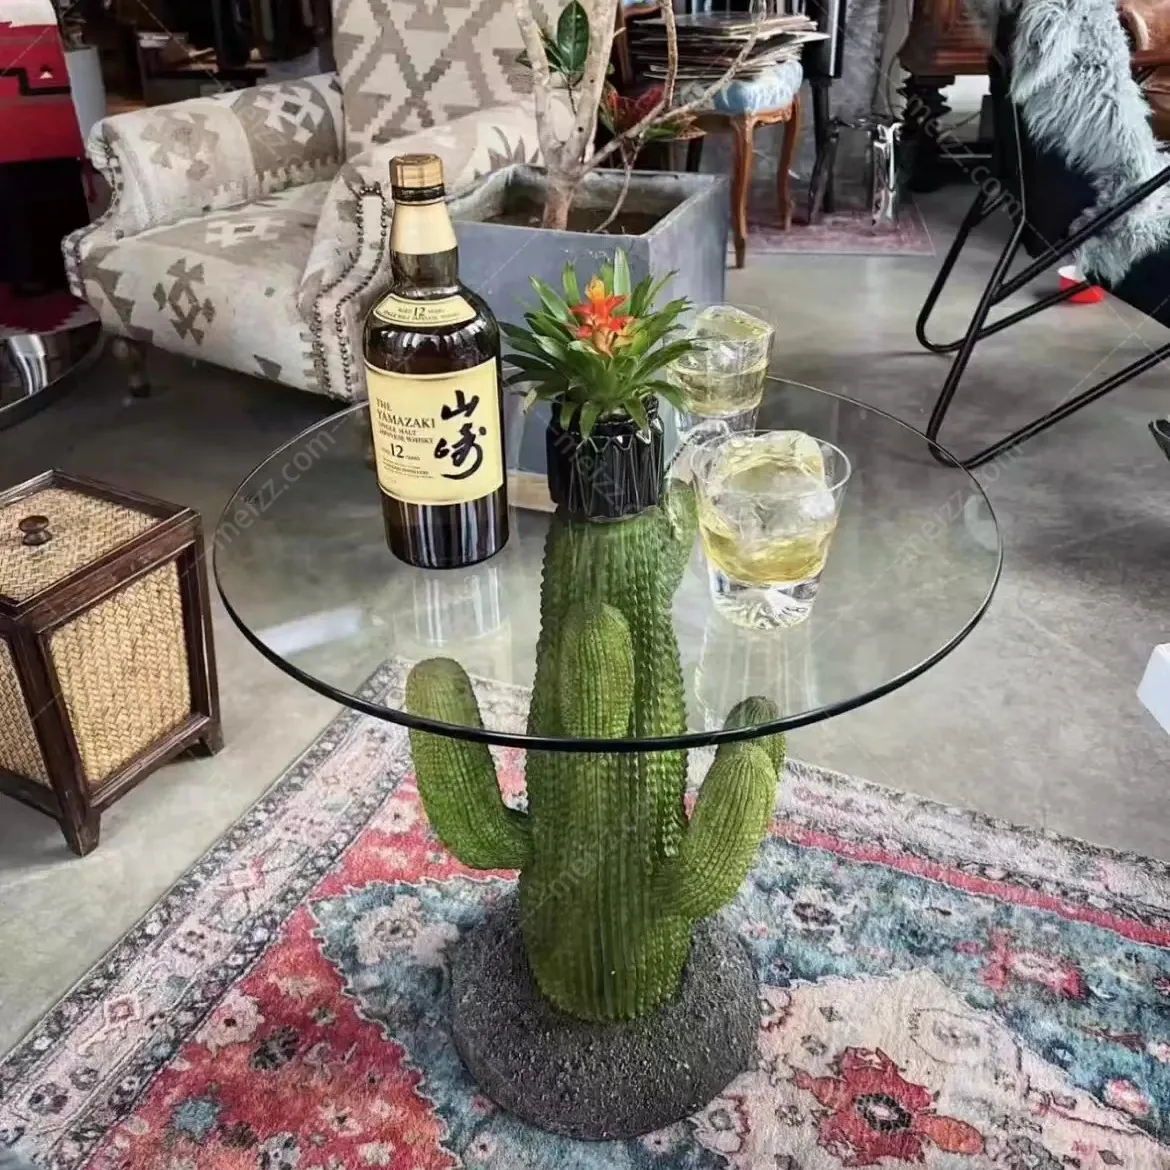 cactus side table